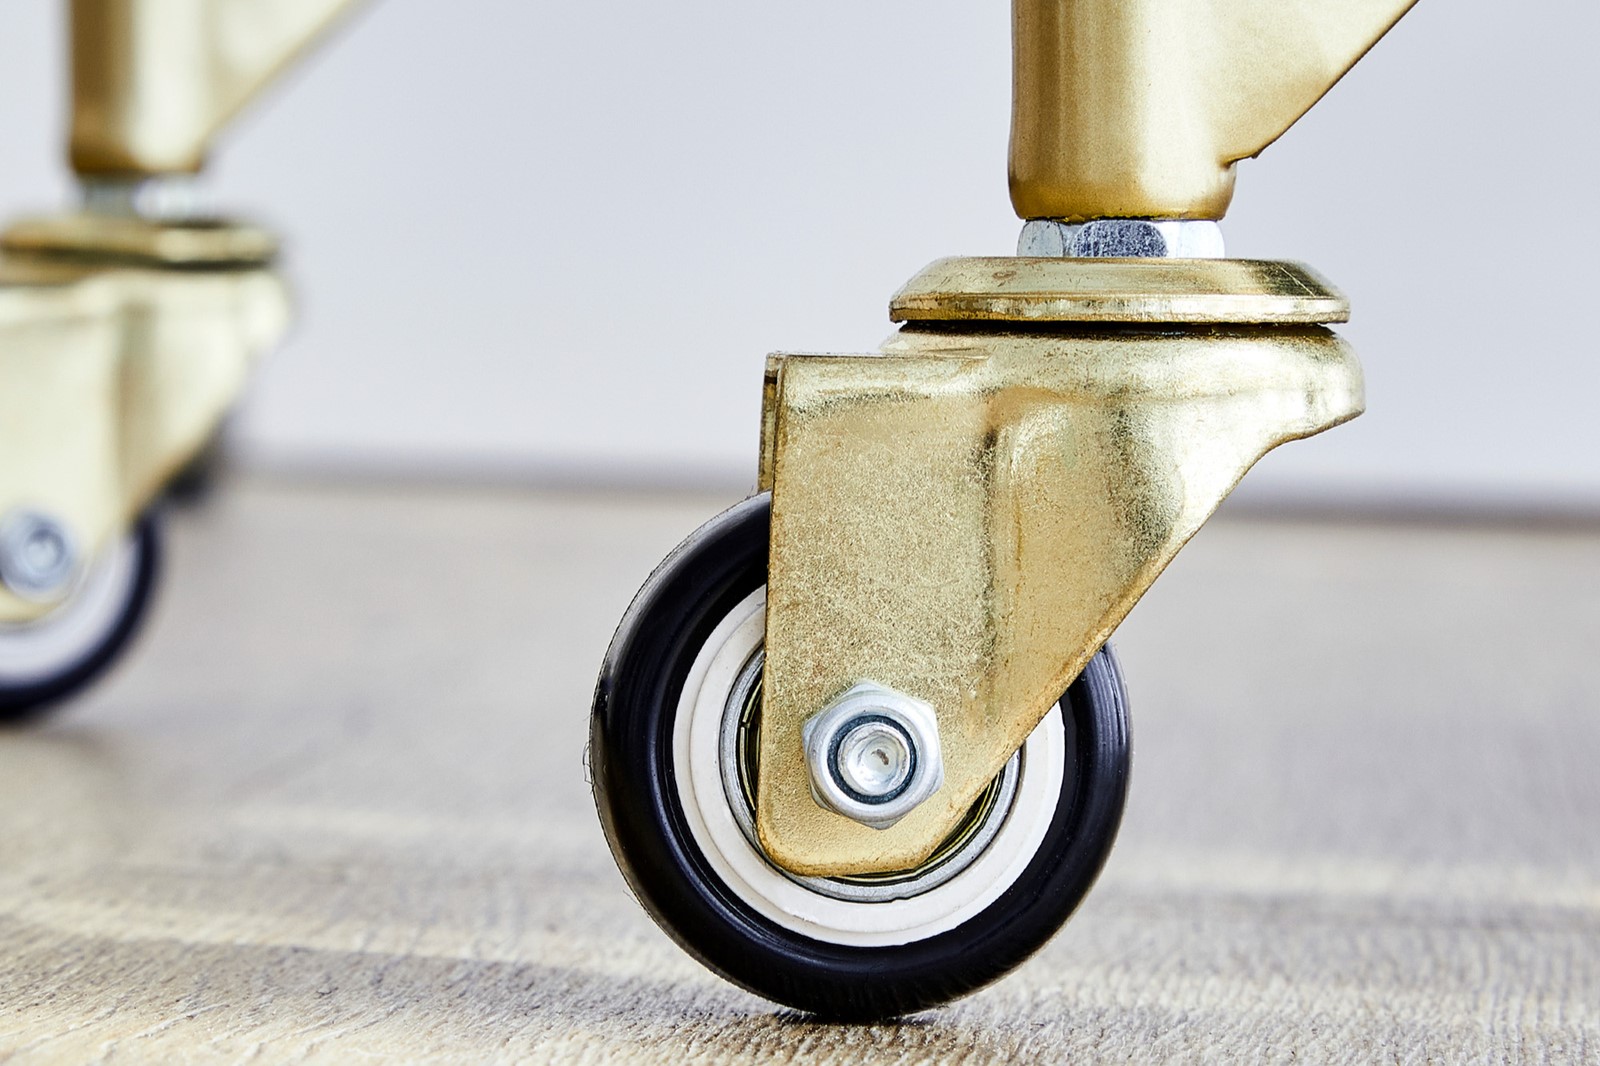 How To Change Wheels On A Bar Cart